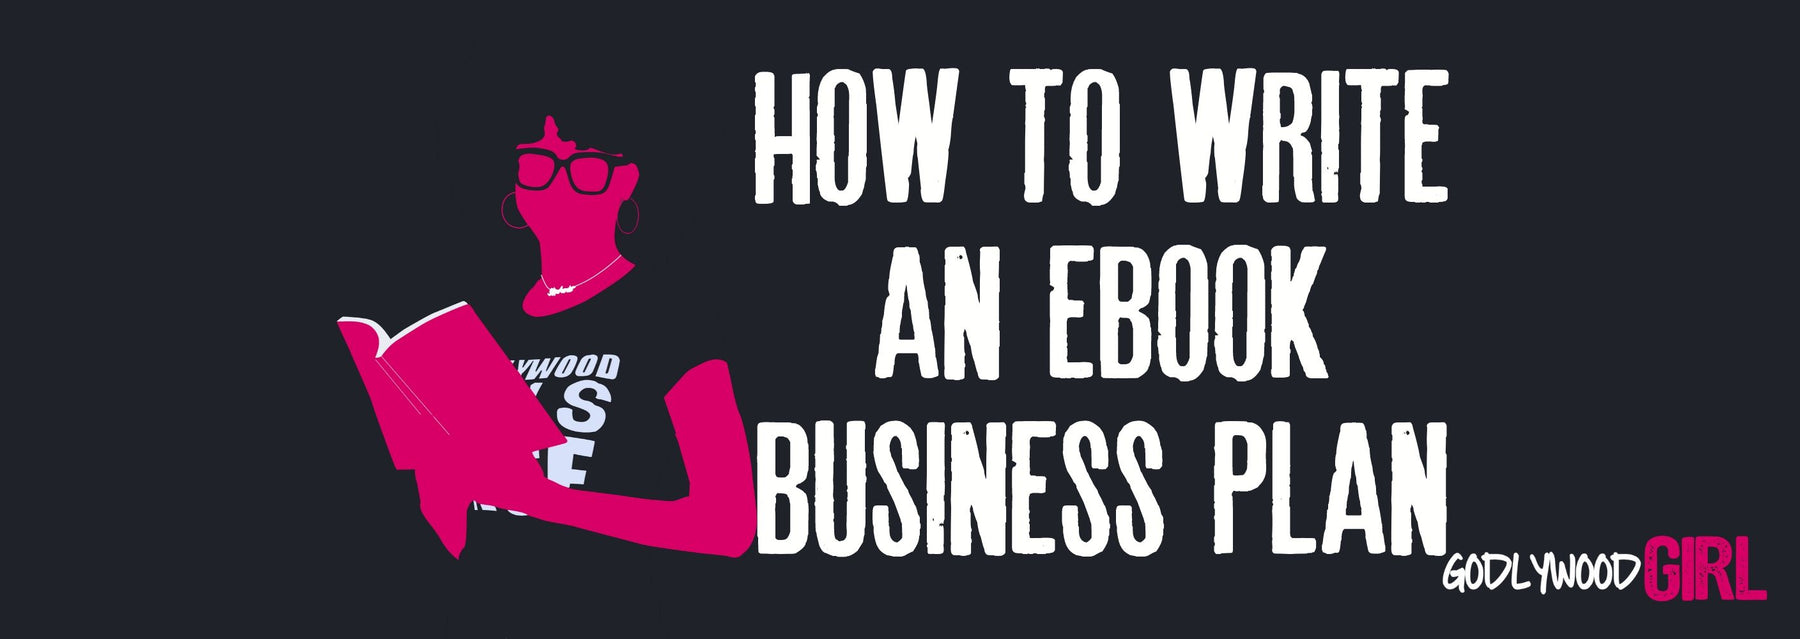 HOW TO WRITE AN EBOOK BUSINESS PLAN (how to create and sell an eBook) || HOW TO